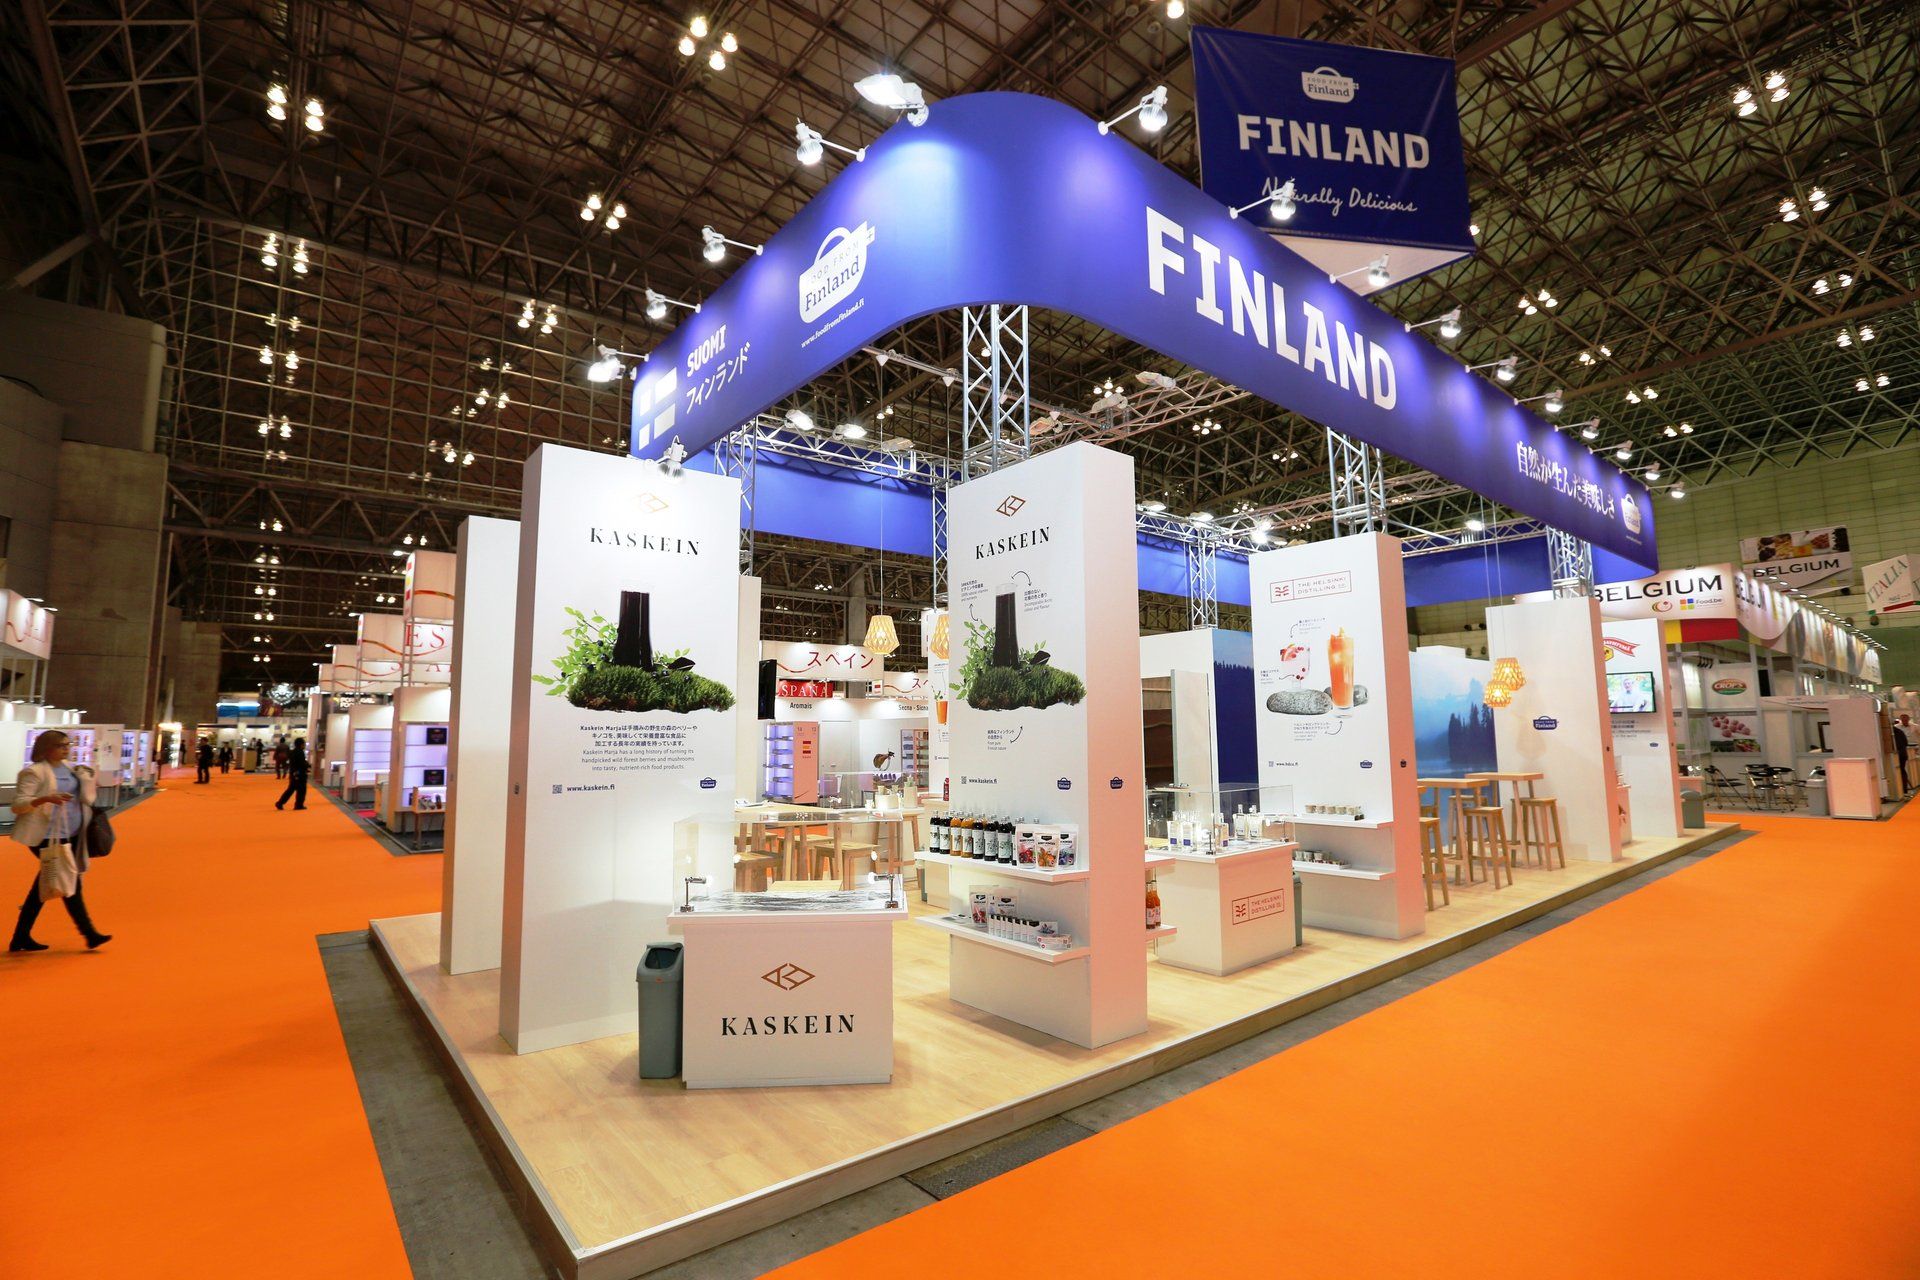 Finland Pavilion @ Foodex 2016. Booth designed and built by Essential Global Fairs.